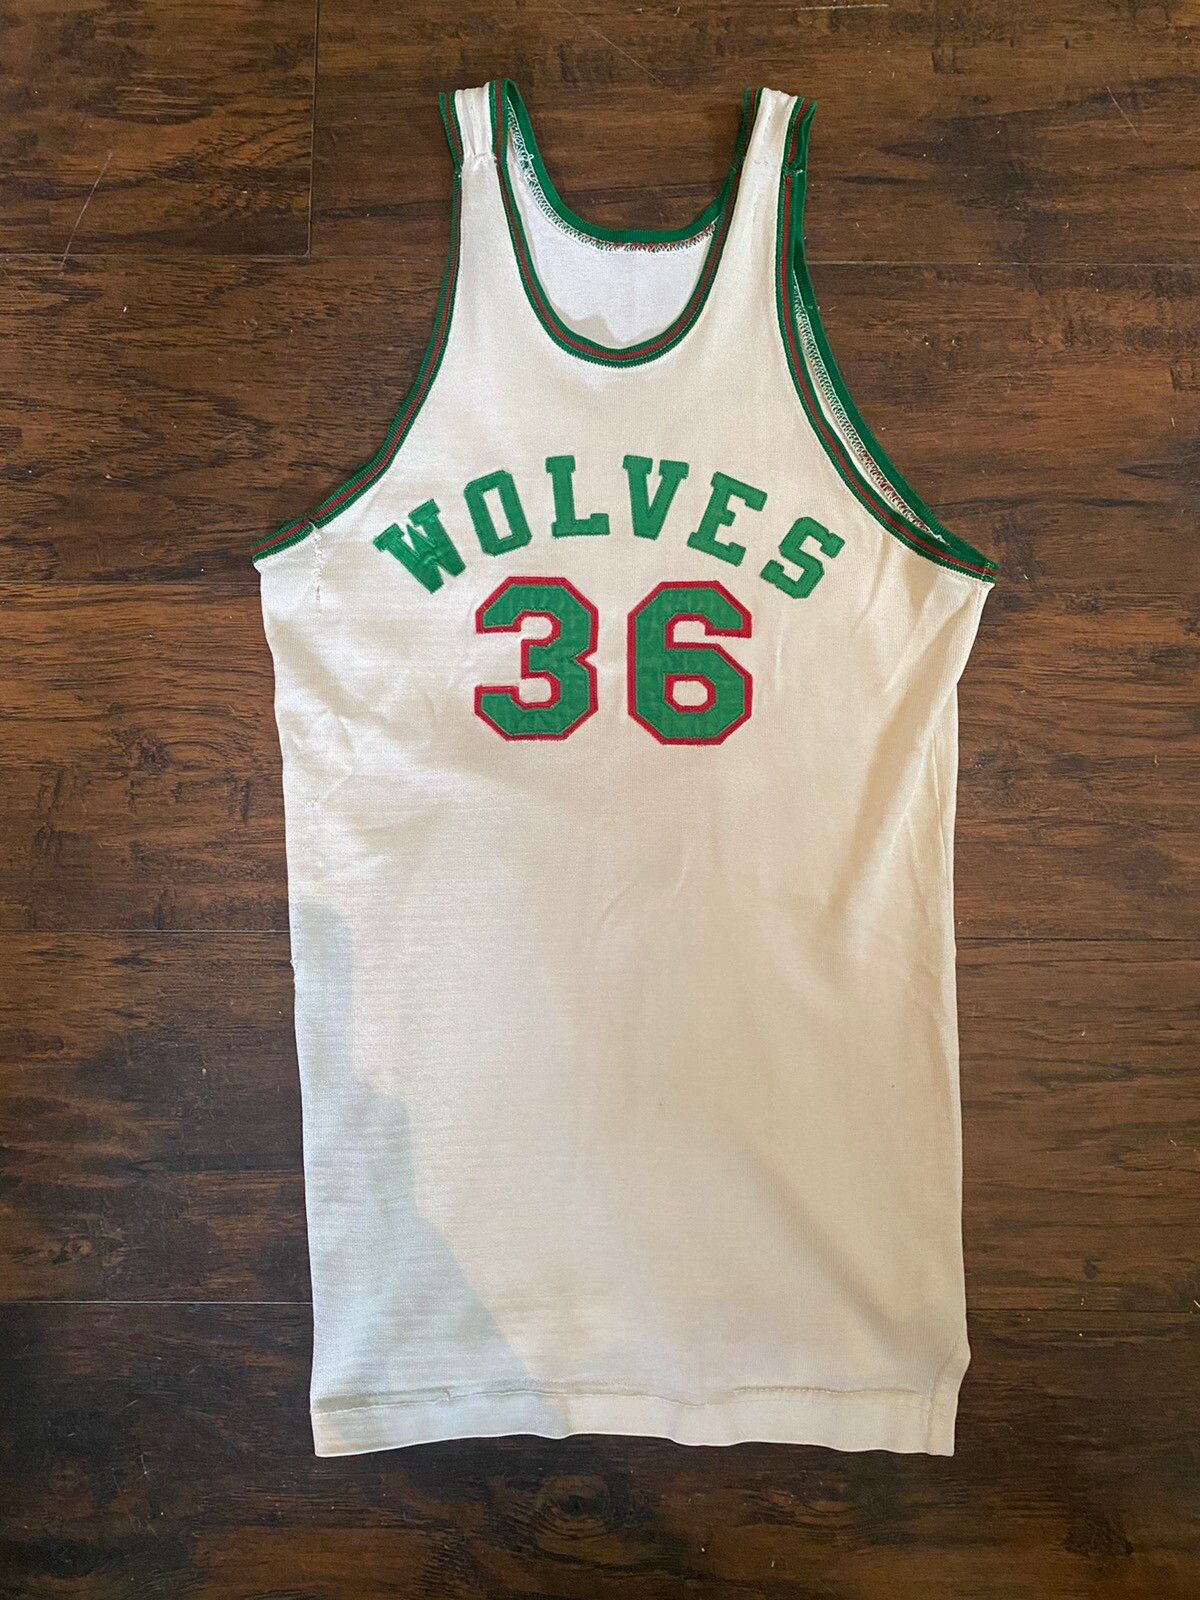 Vintage 1950s Rawlings Basketball Jersey Wolves 36 Size US L / EU 52-54 / 3 - 1 Preview